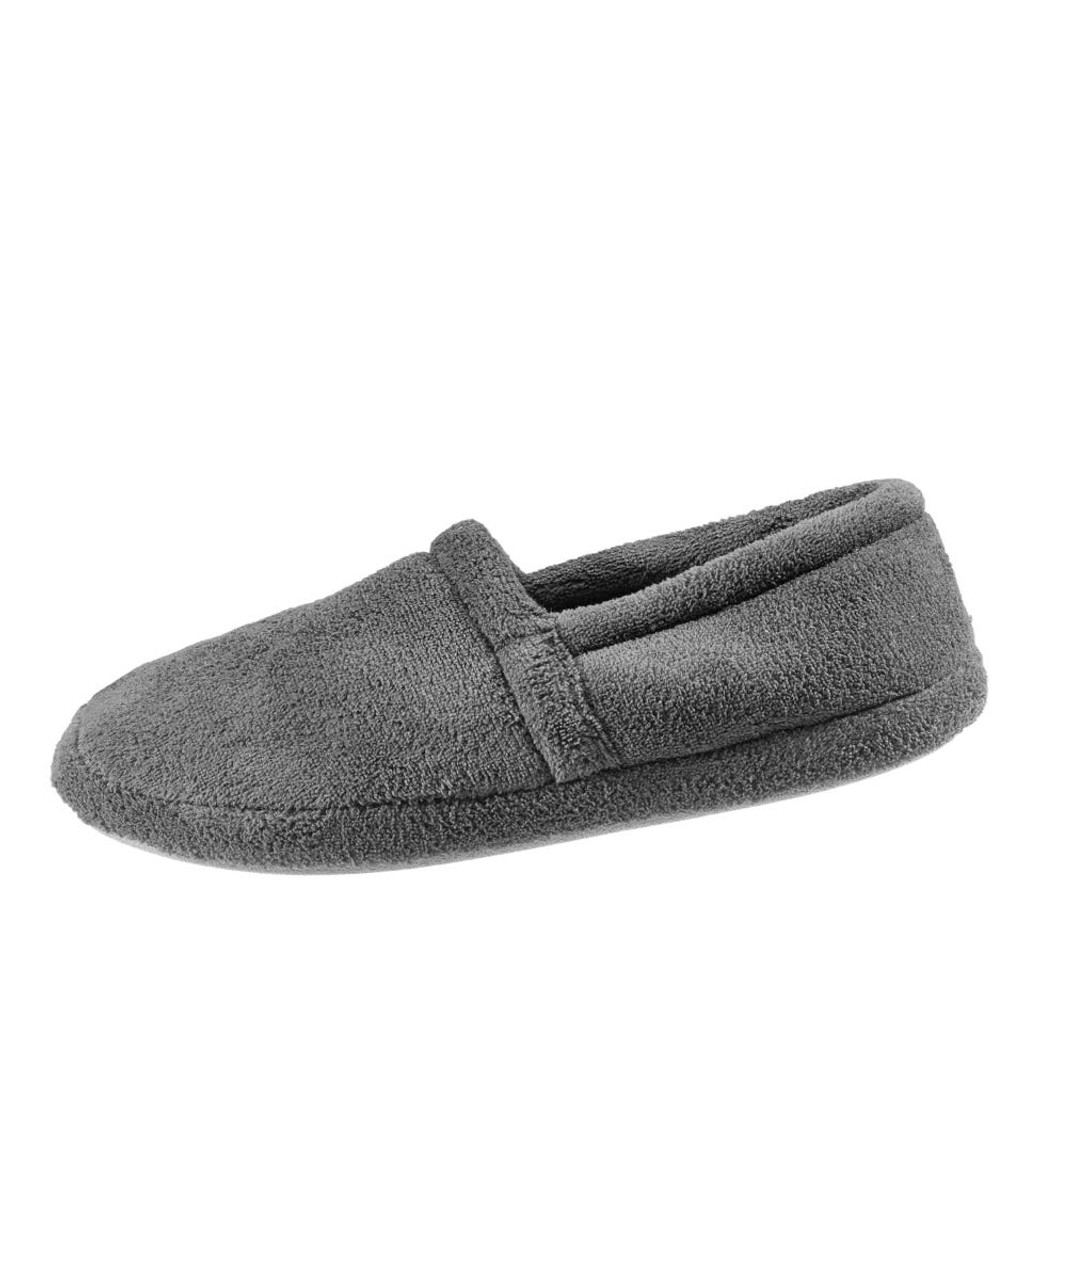 Silverts SV51060 Comfortable Mens House Slippers Gray, Size=M, SV51060-SV18-M